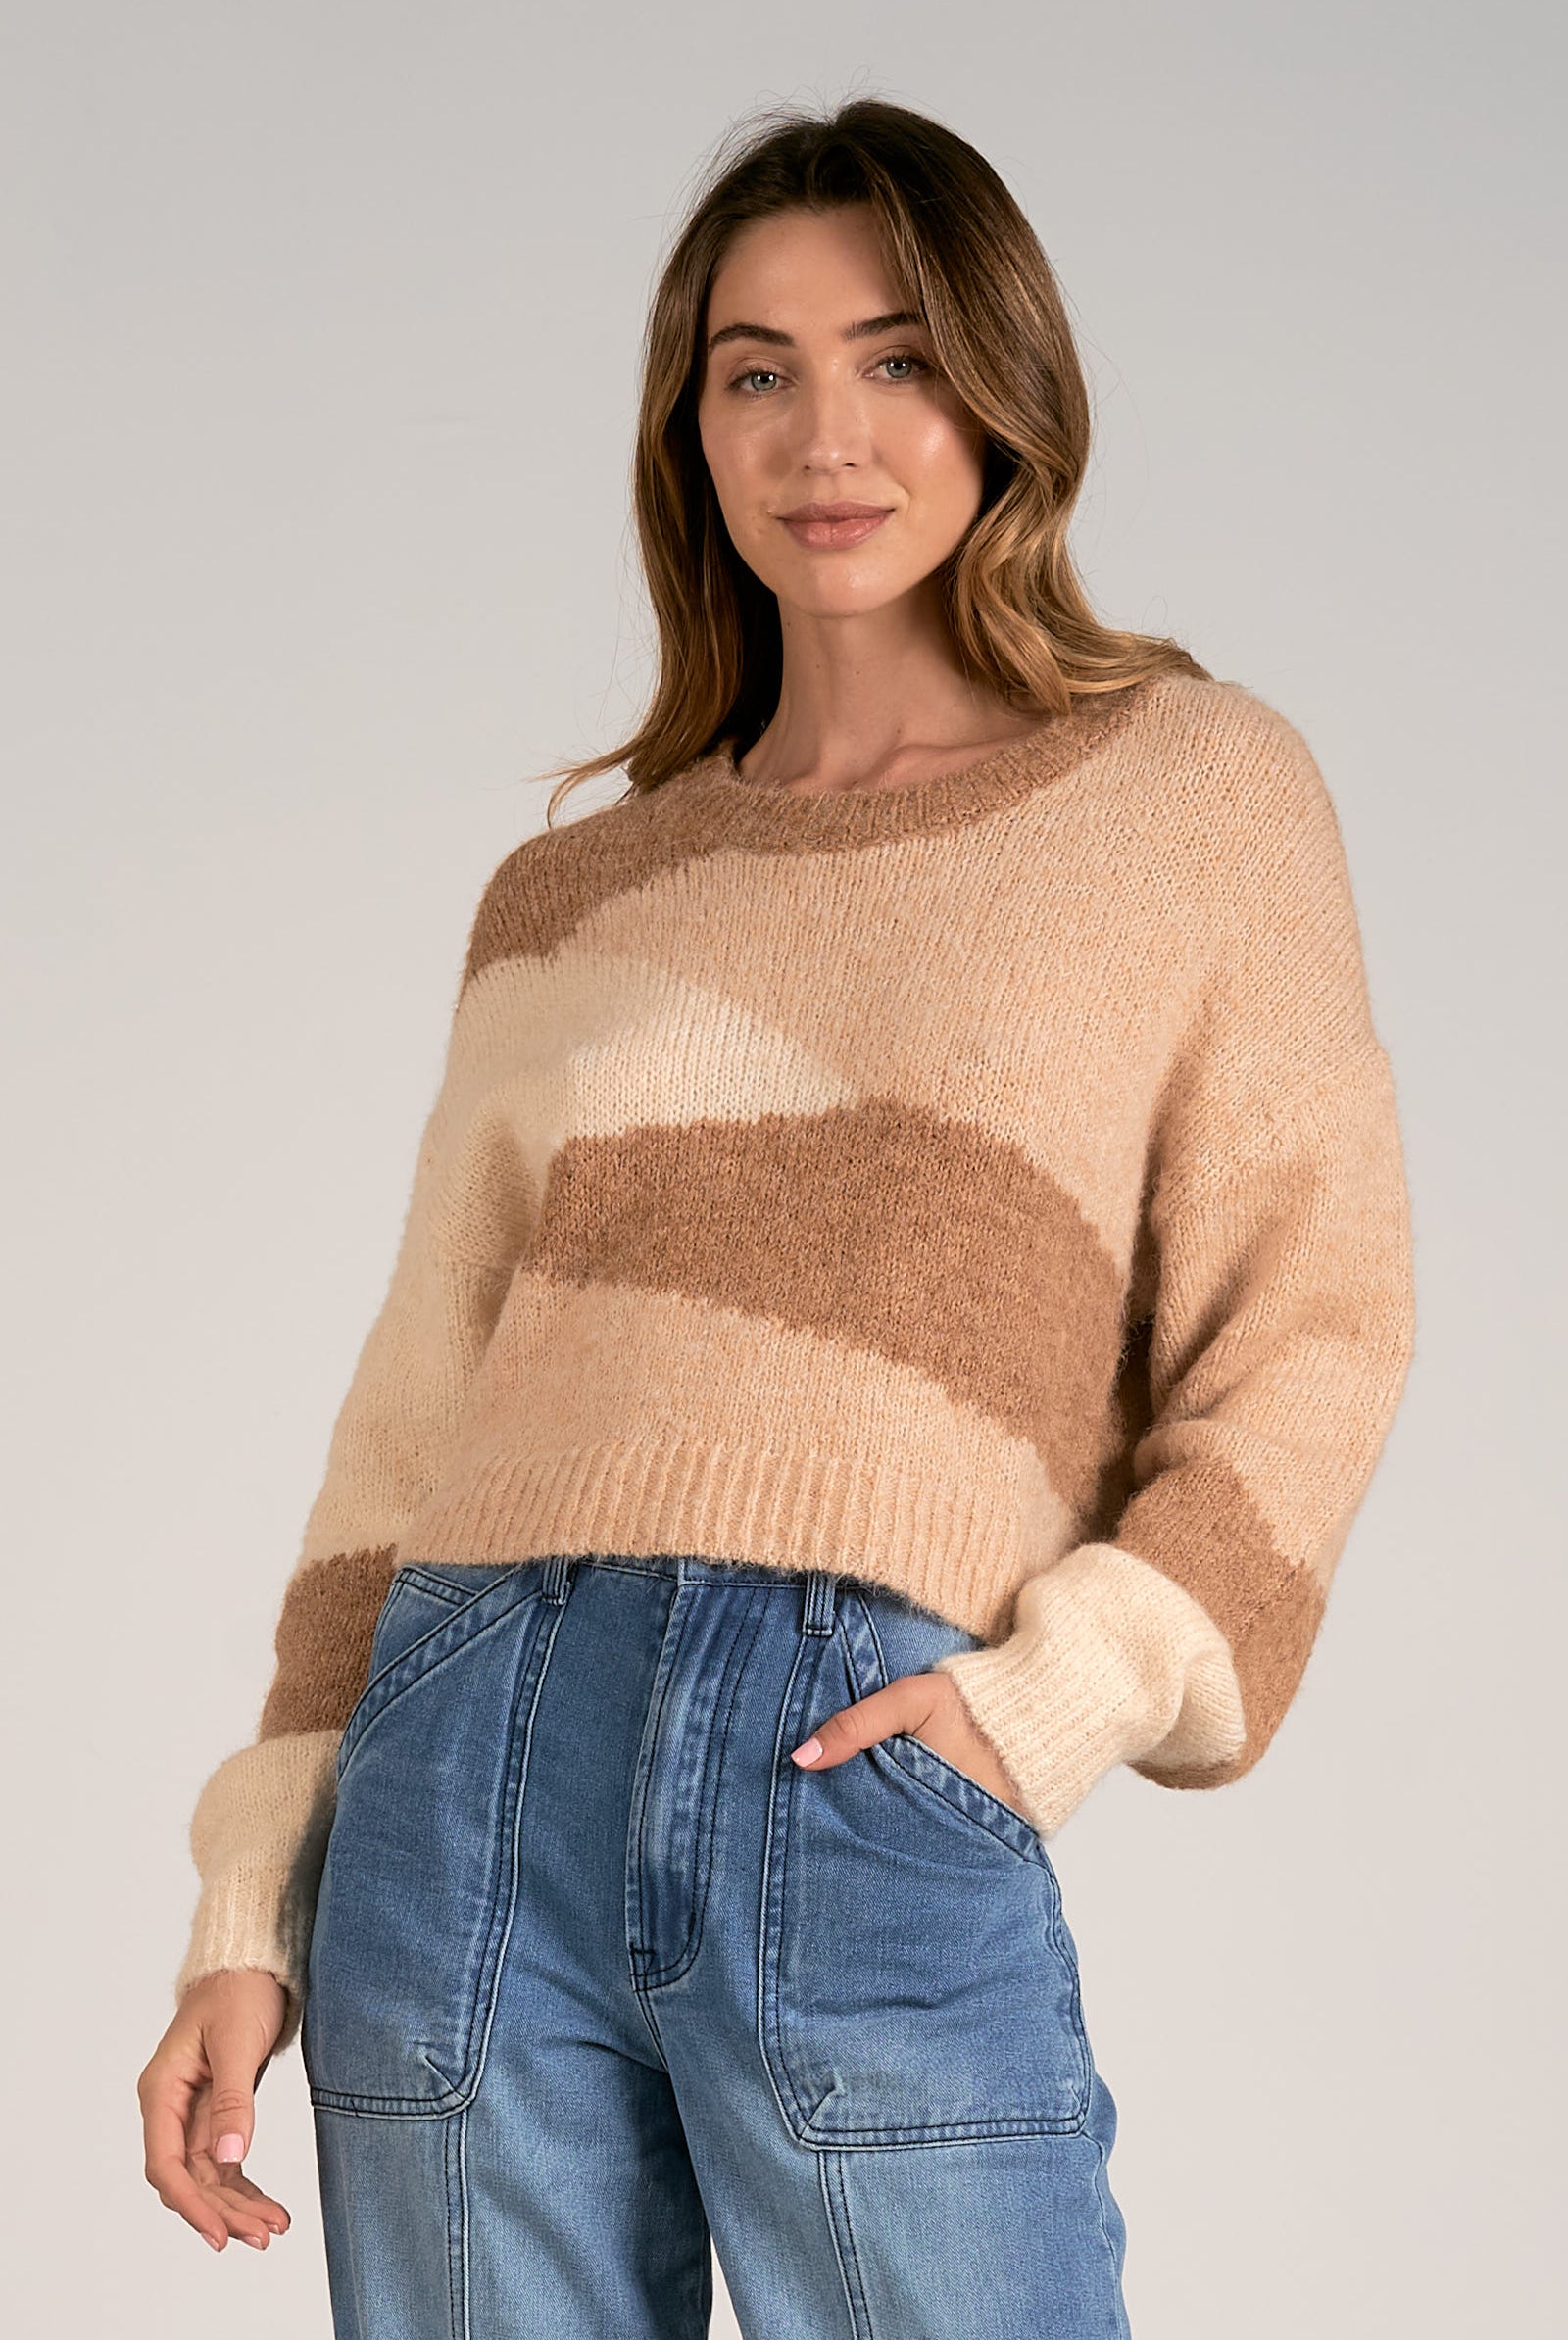 Bay Horizon Sweater-Sweaters-Vixen Collection, Day Spa and Women's Boutique Located in Seattle, Washington